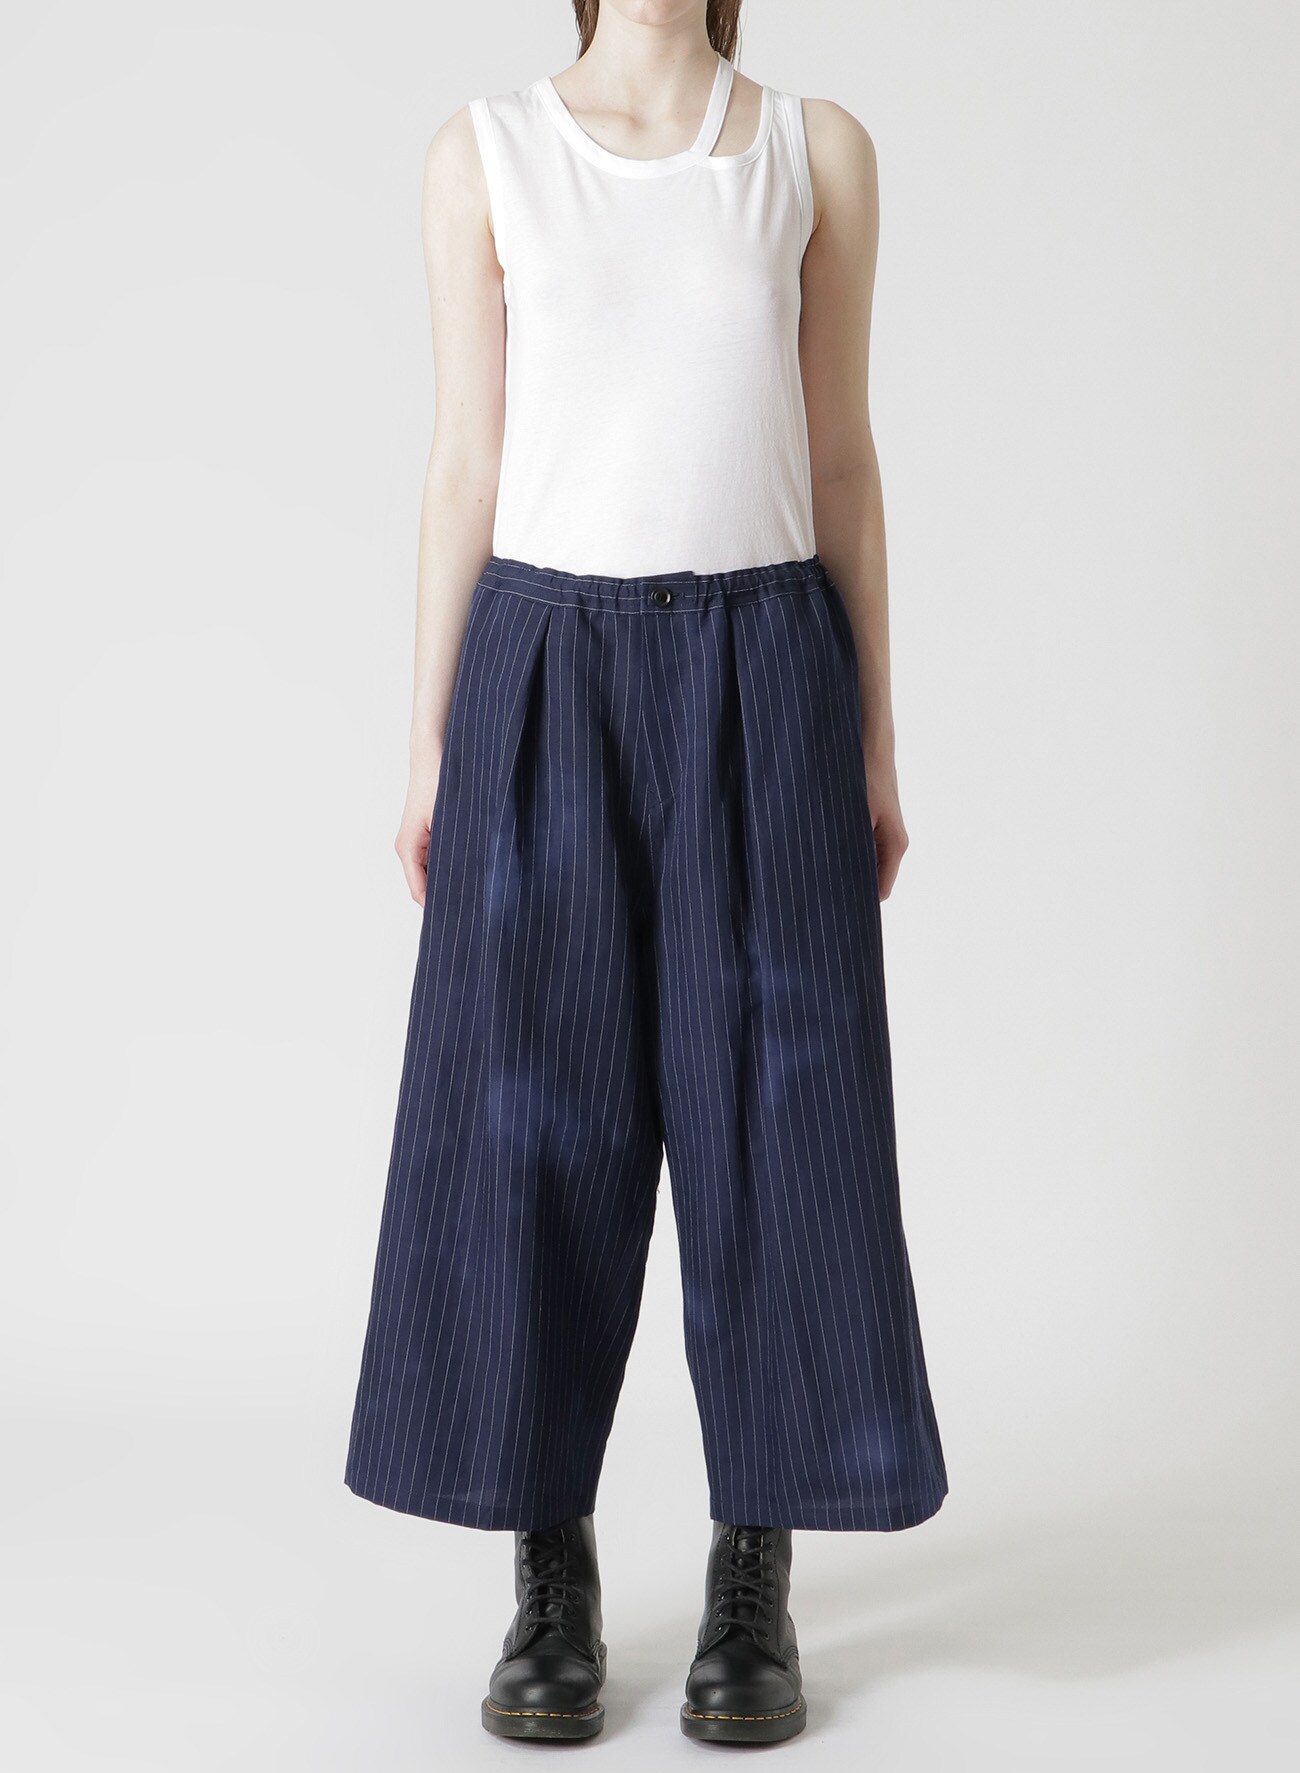 LINEN/COTTON PIN-STRIPED UNEVENLY DYED WIDE LEG PLEATED PANTS	